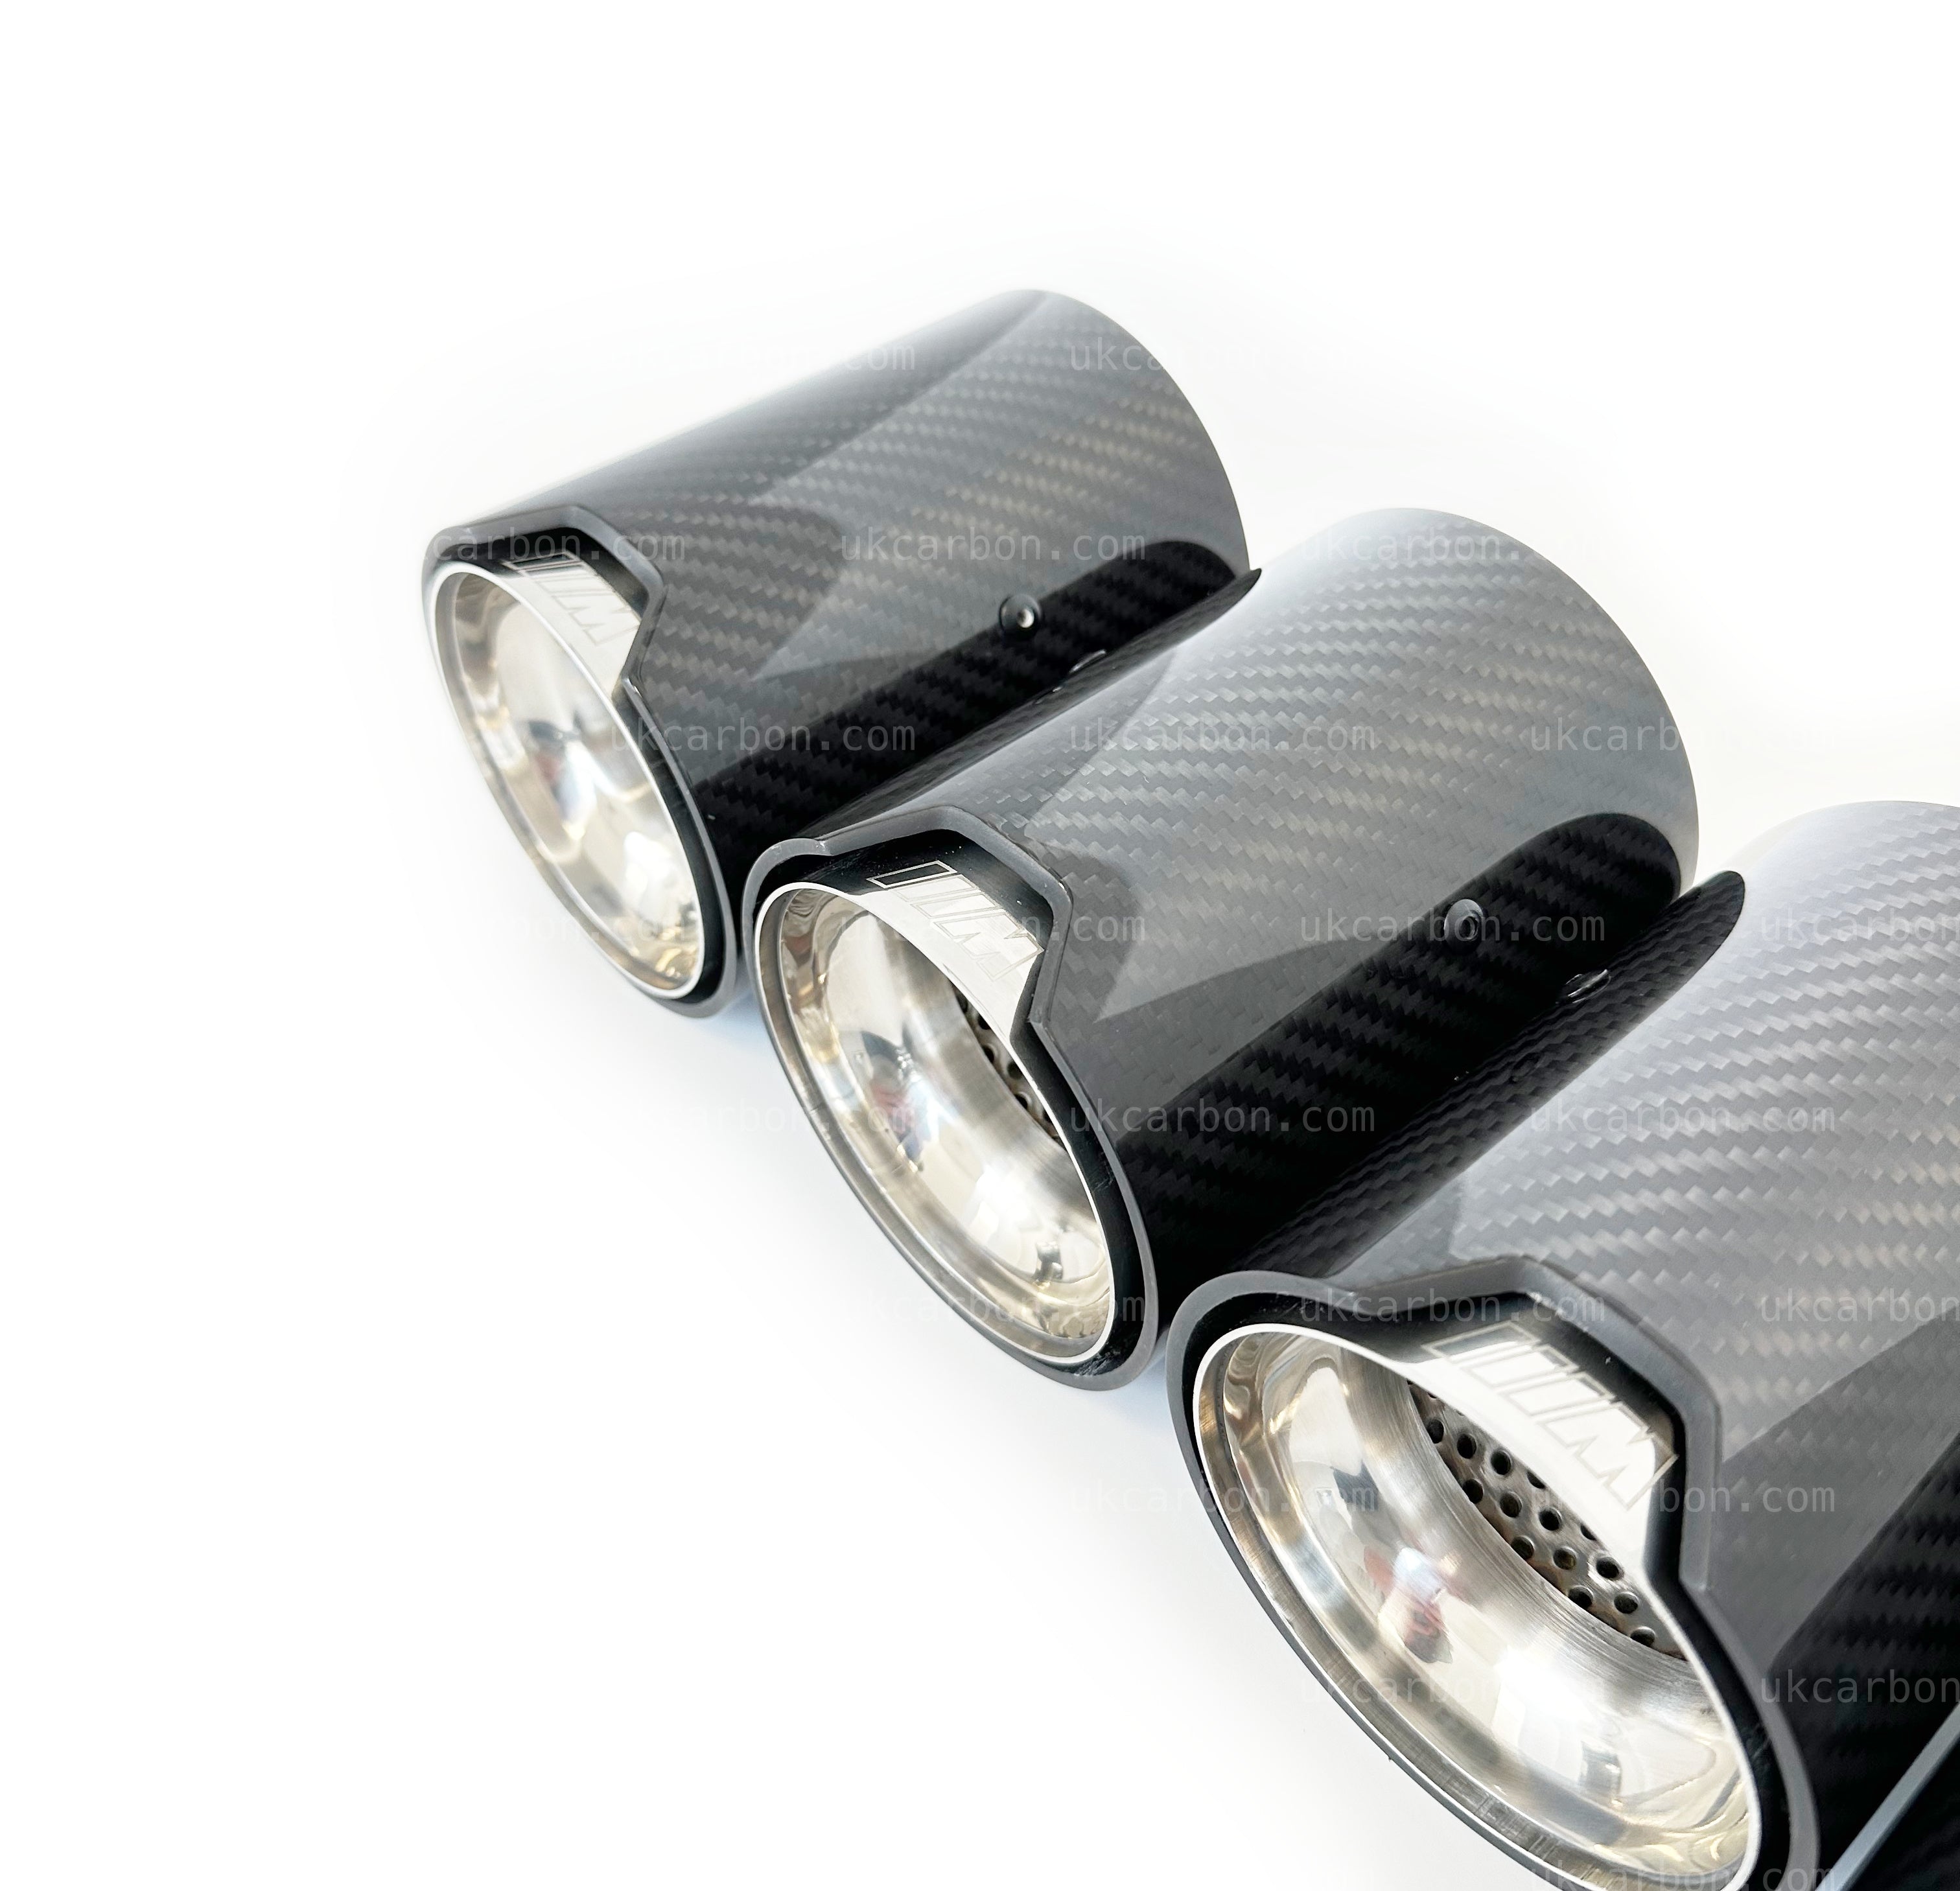 BMW M2 M3 M4 Carbon Exhaust Tips Silver Fibre MP MPE F87 F80 F82 F83 by UKCarbon